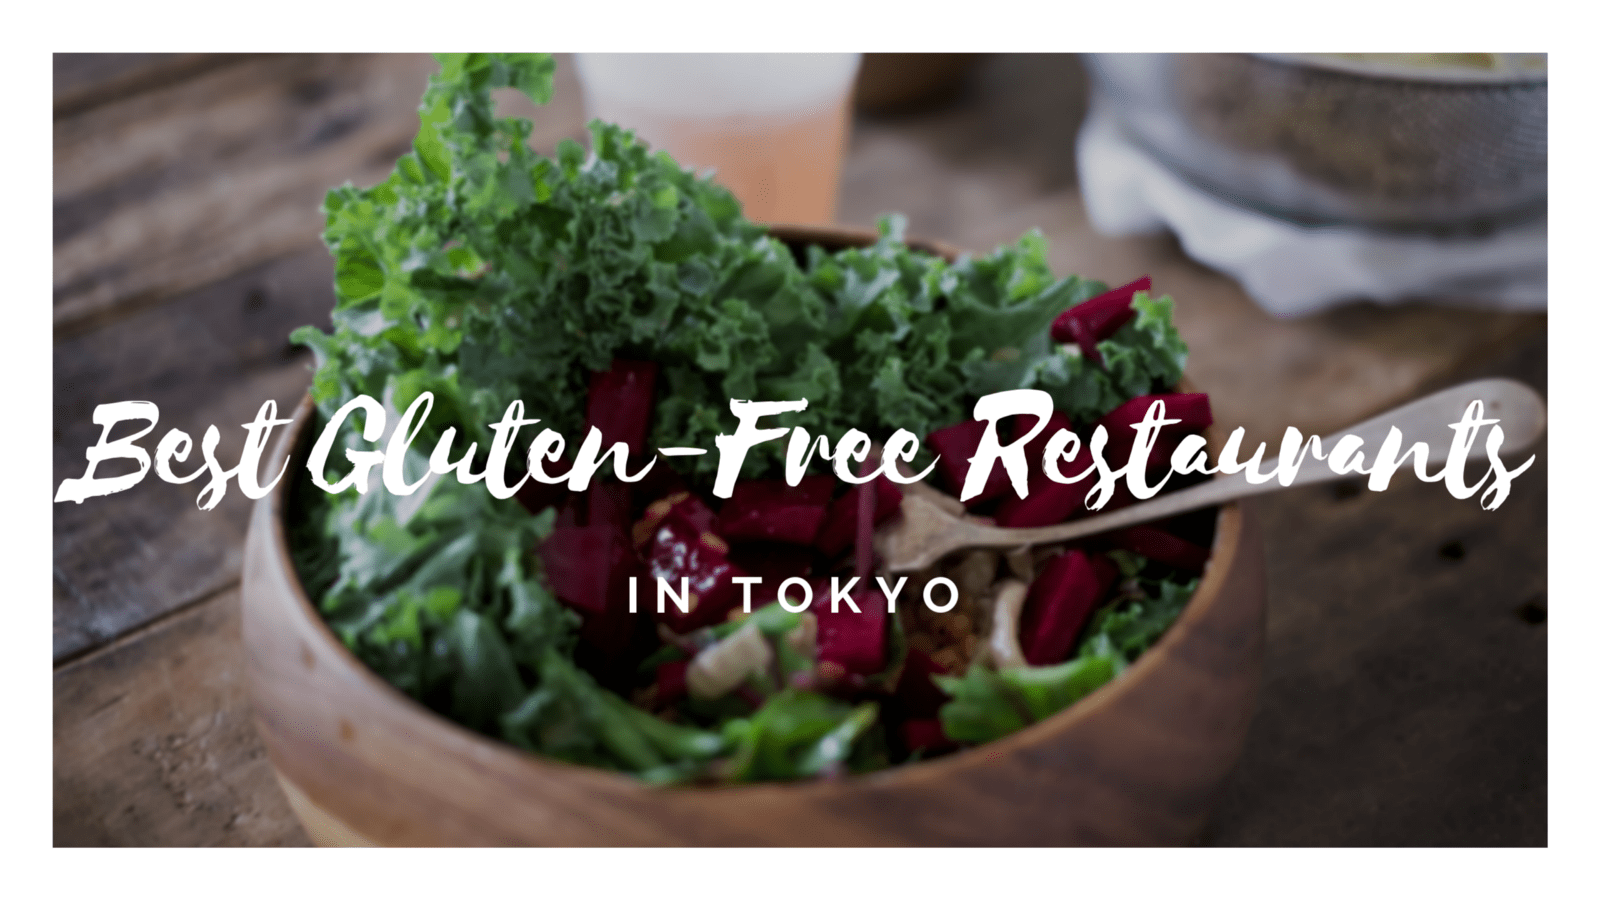 8 Gluten Free Restaurants and Cafes in Tokyo